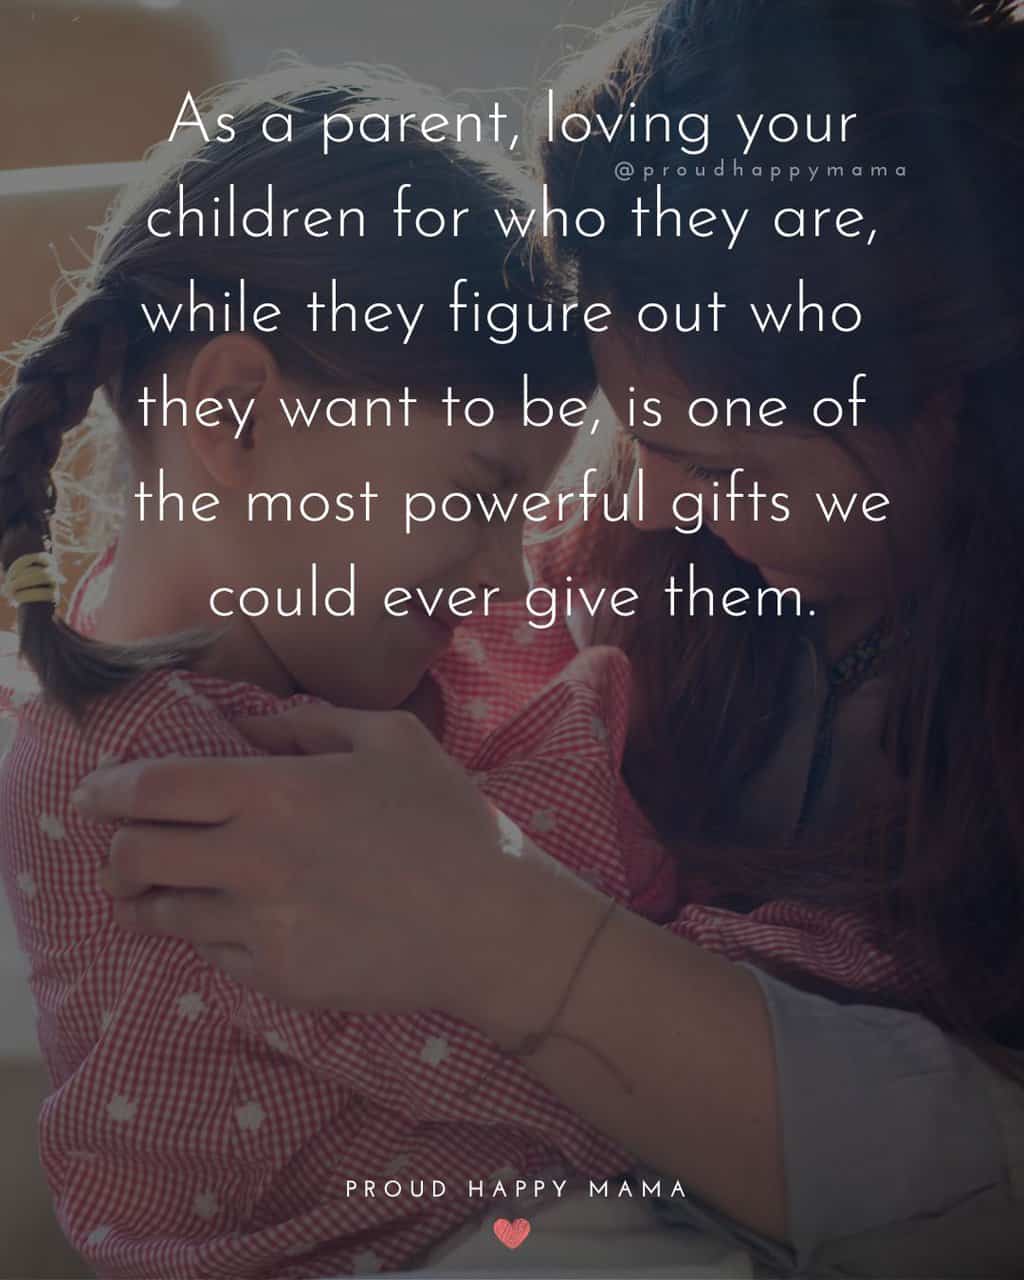 Mother hugging daughter with a quote about parenting text overlay. 'As a parent, loving your children for who they are, while they figure out who  they want to be, is one of  the most powerful gifts we could ever give them.'